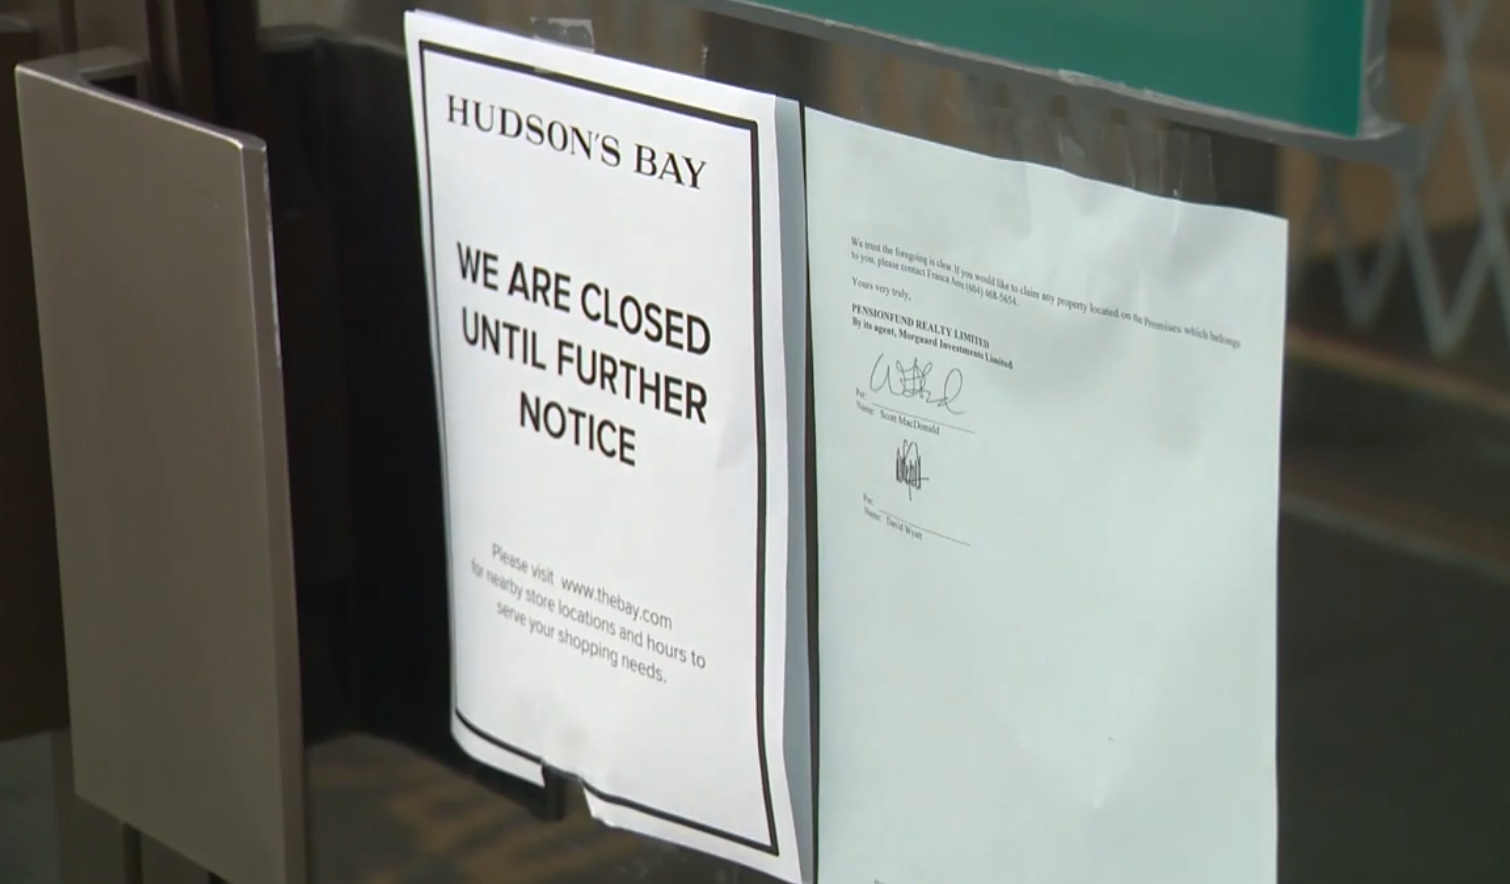 Hudson's Bay in Coquitlam shuttered, landlord says it defaulted on